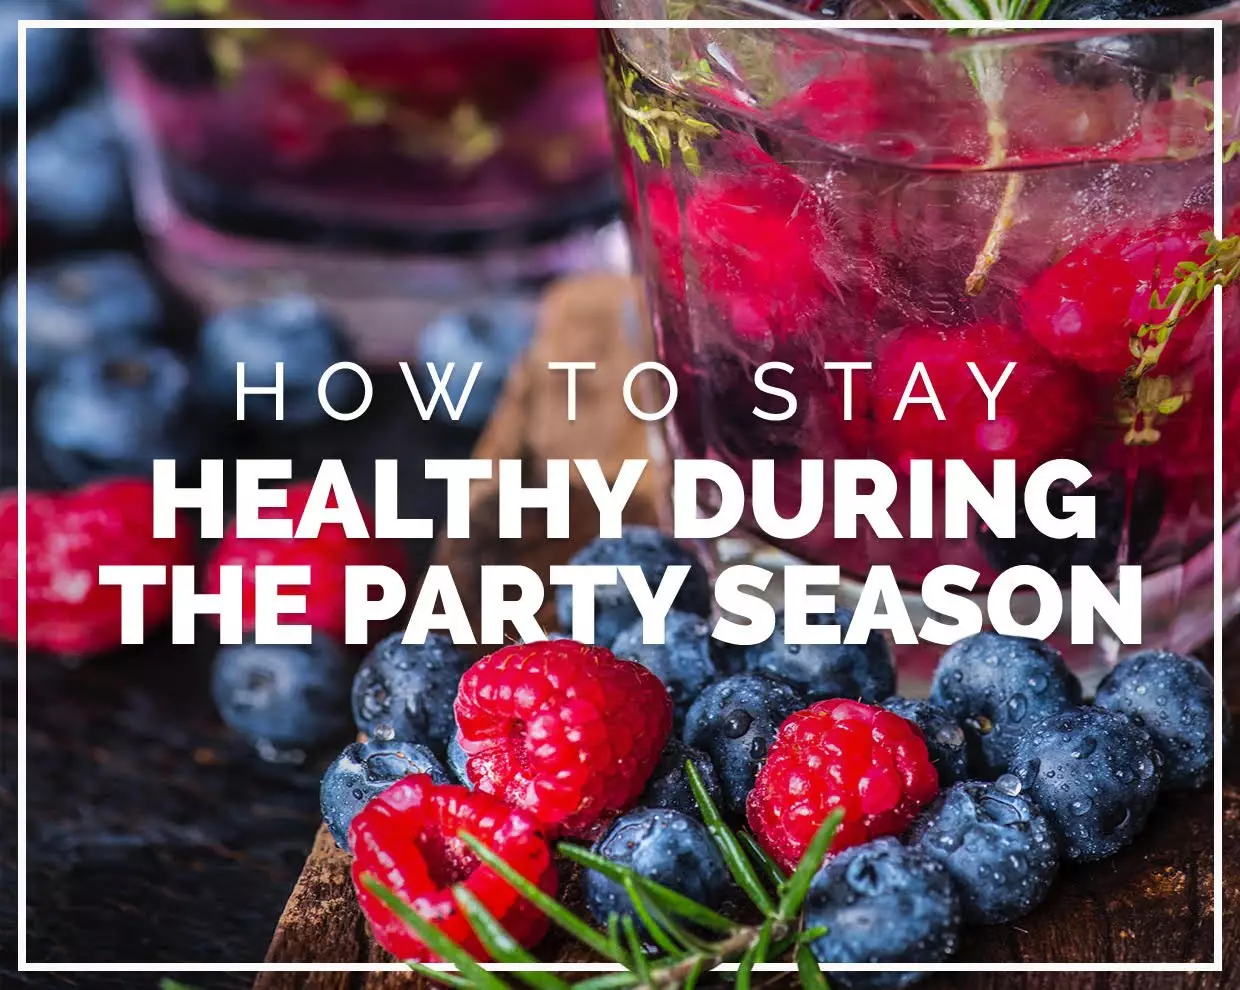 How to stay healthy during the party season